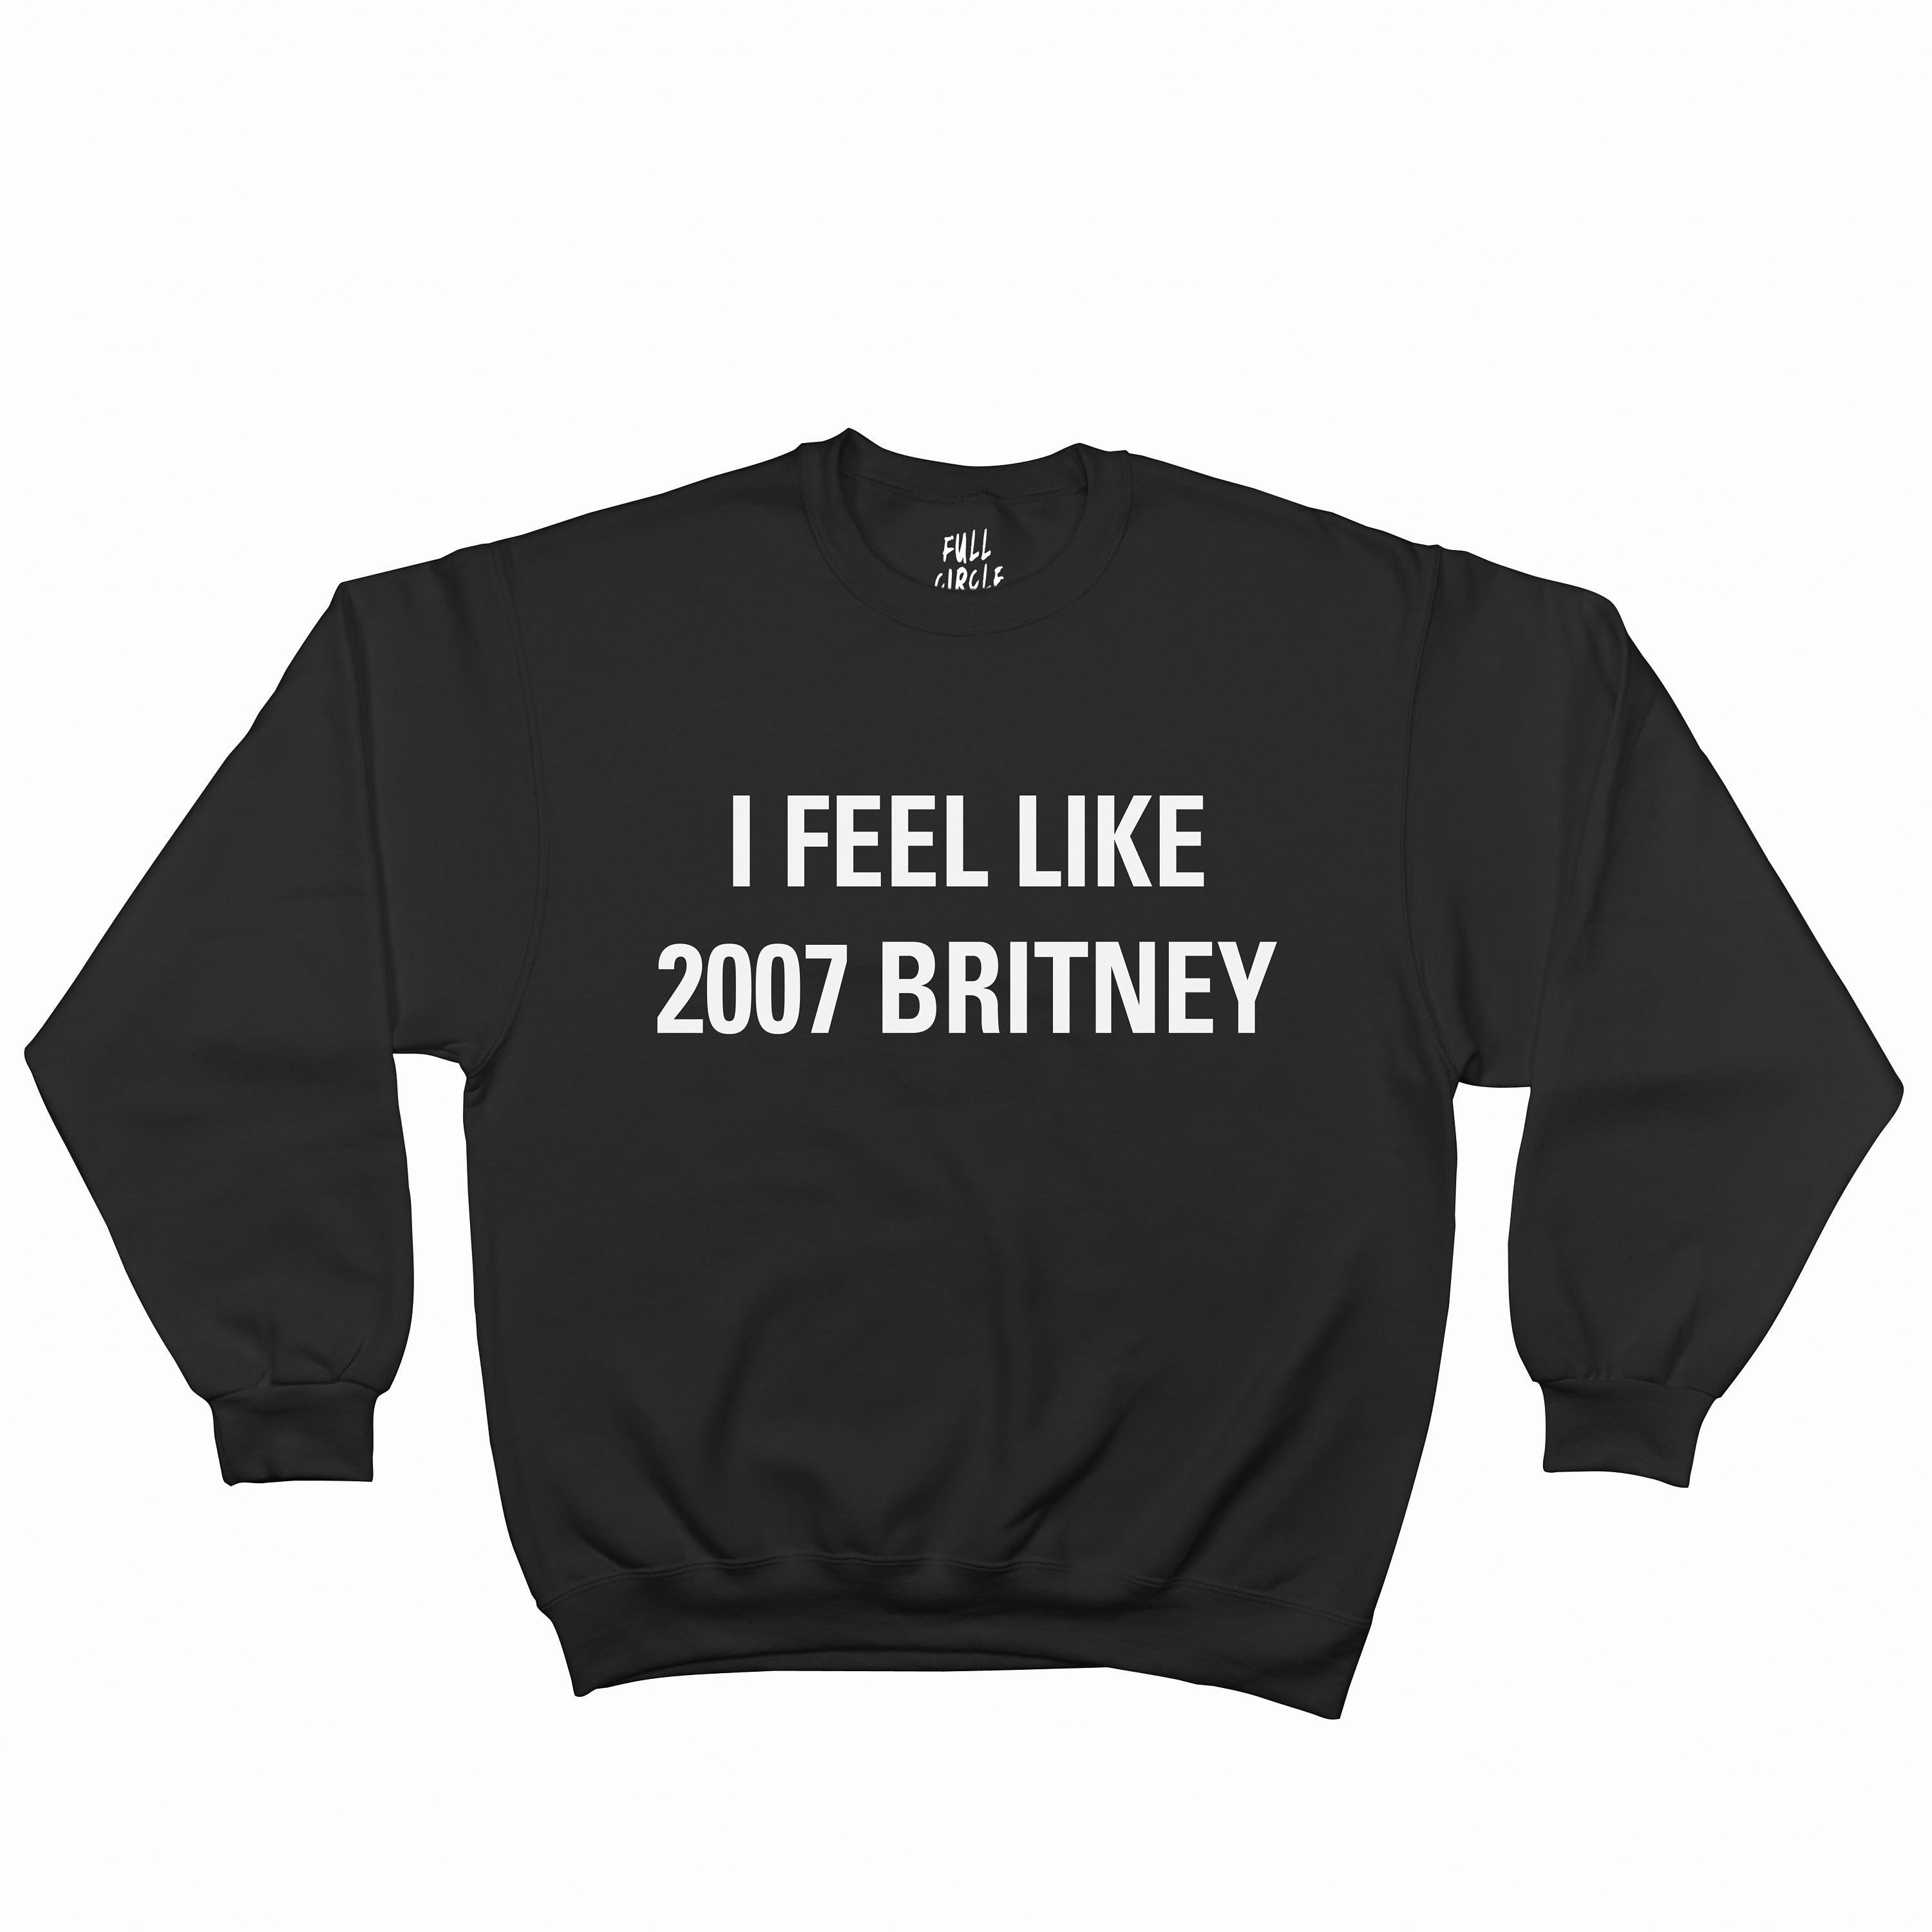 britney given to black gang